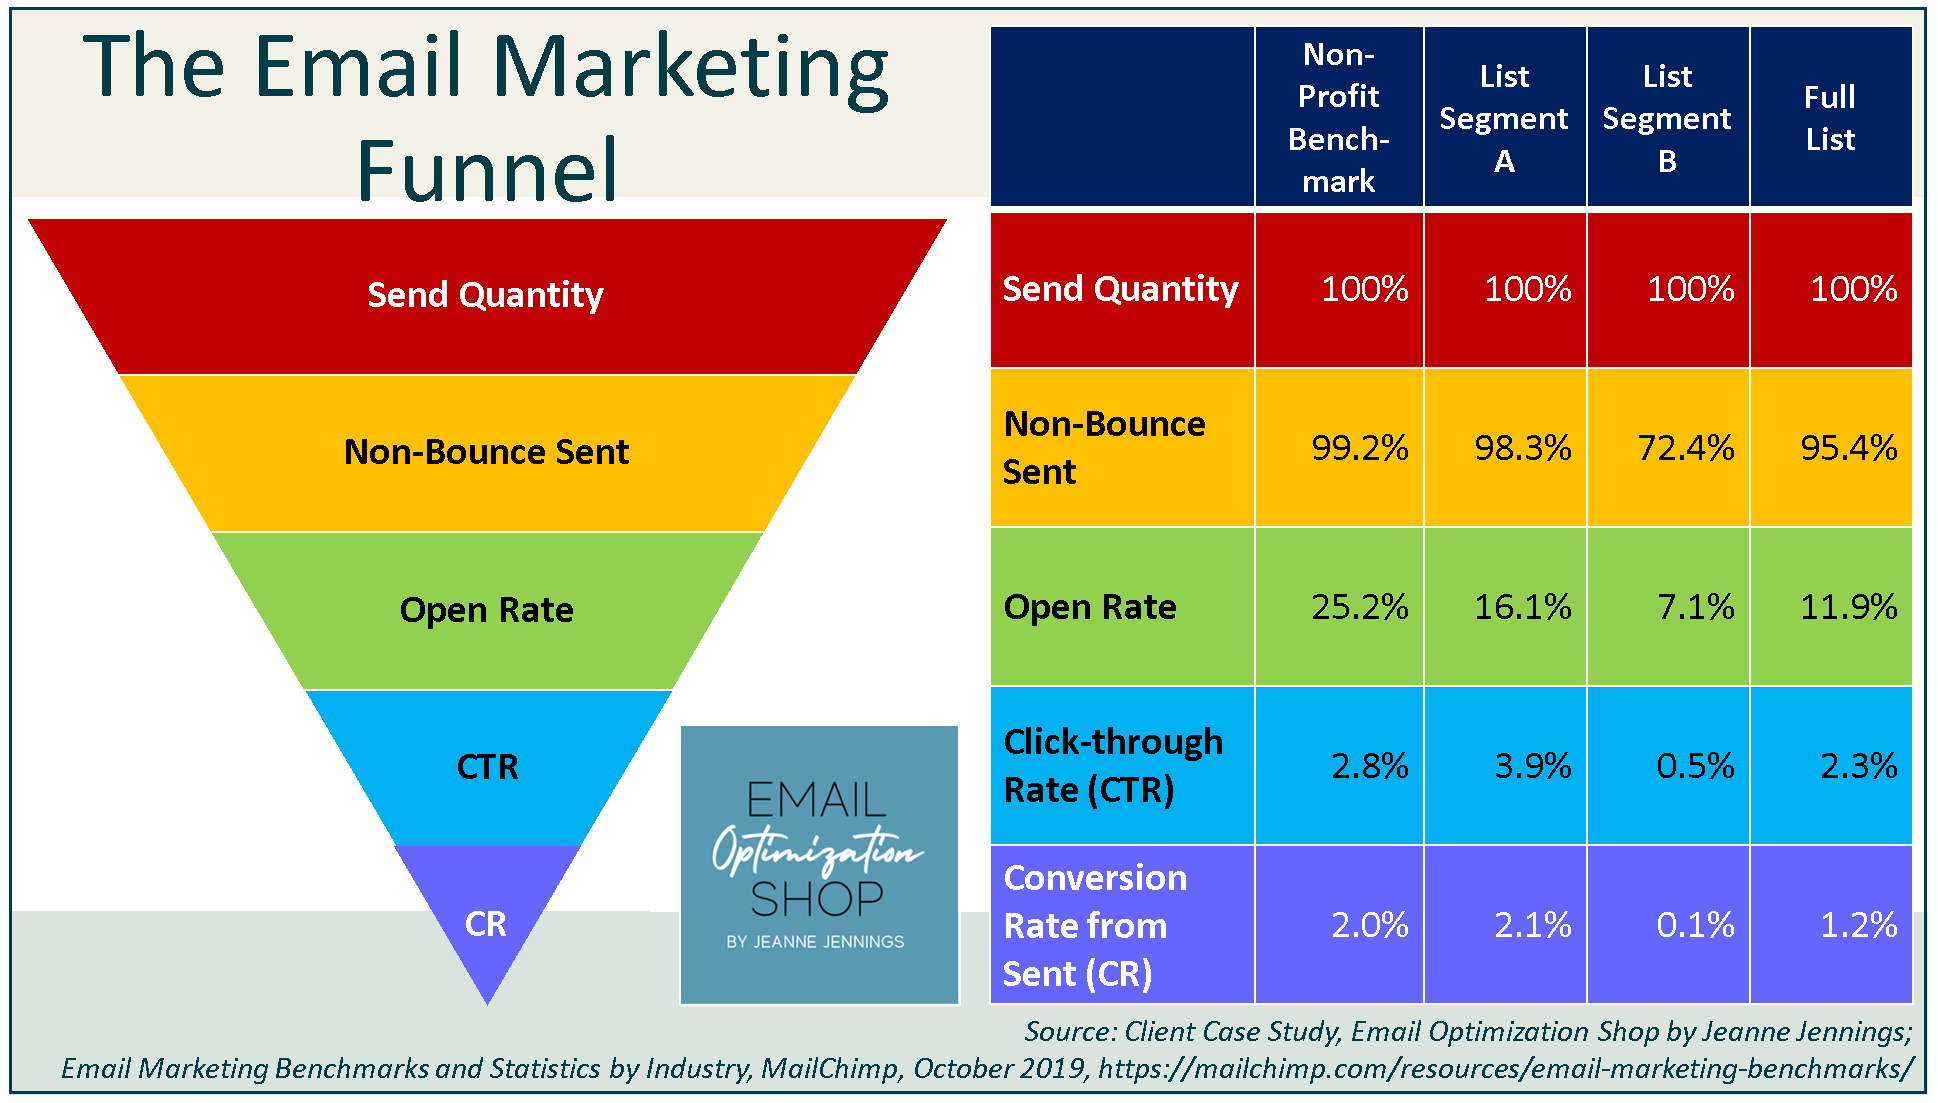 Leveraging the Email Marketing Funnel to Boost Your Bottom-line Performance